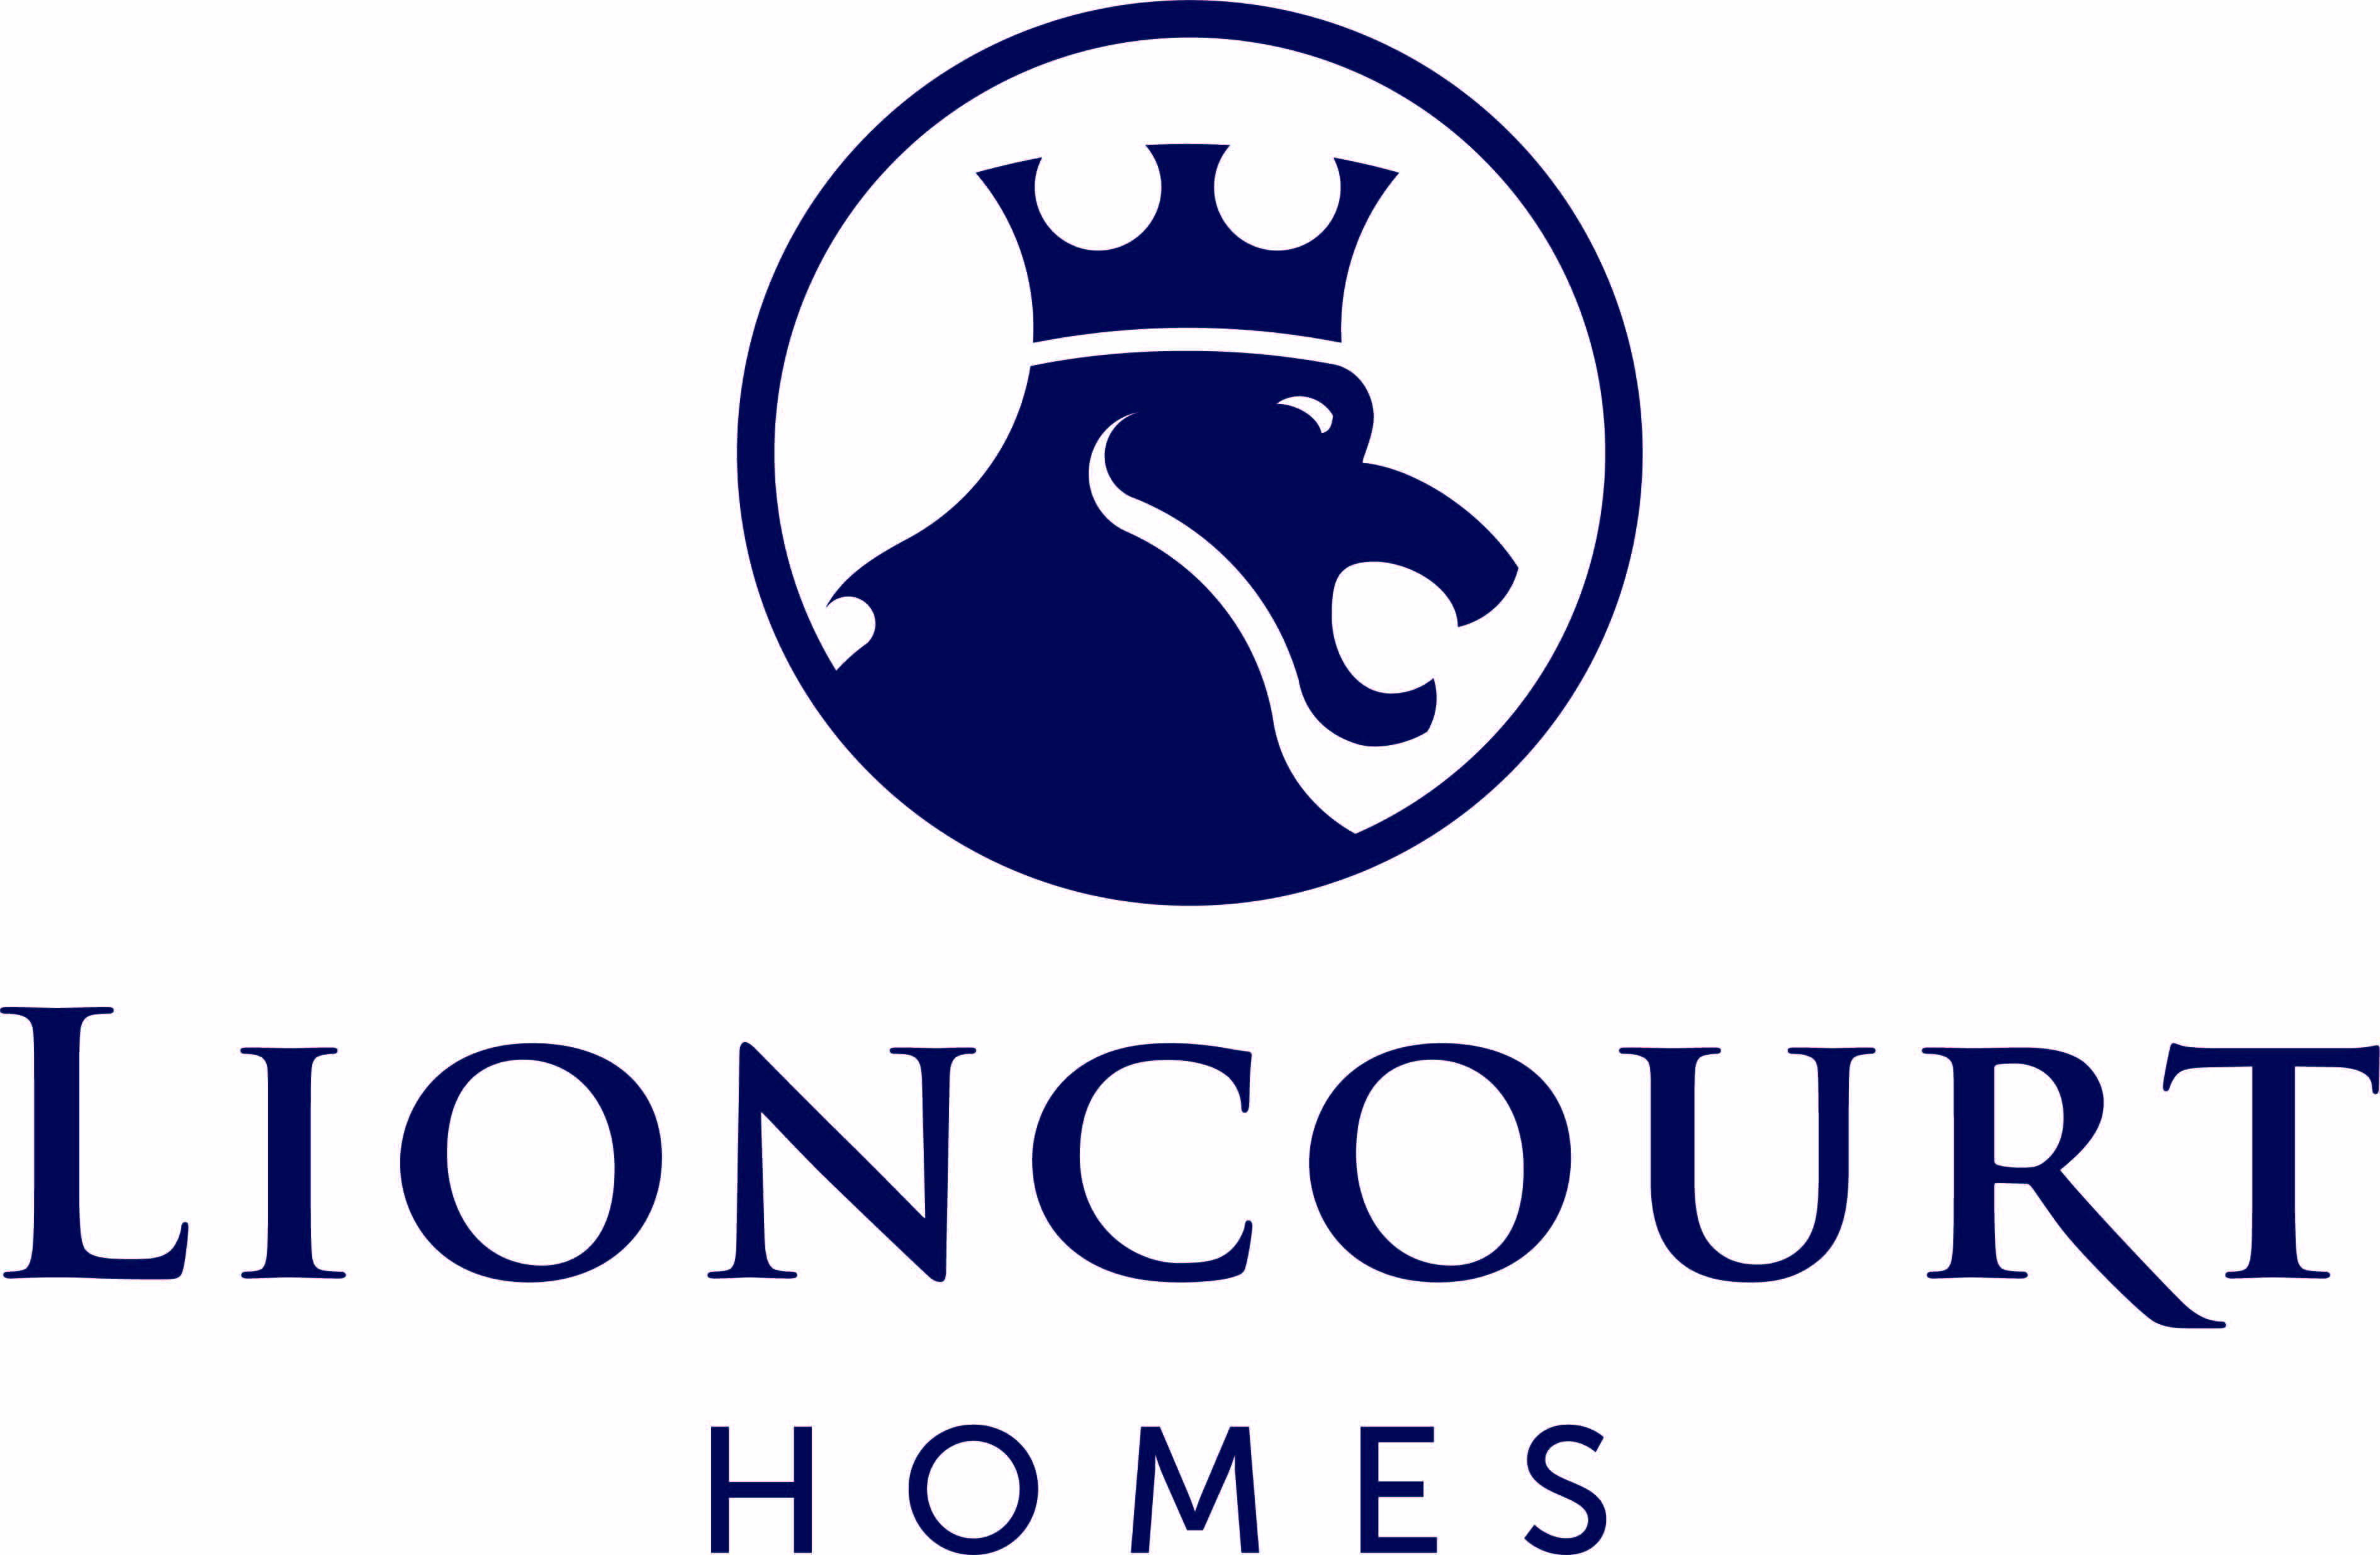 We would like to welcome Lioncourt Homes to ContactBuilder.